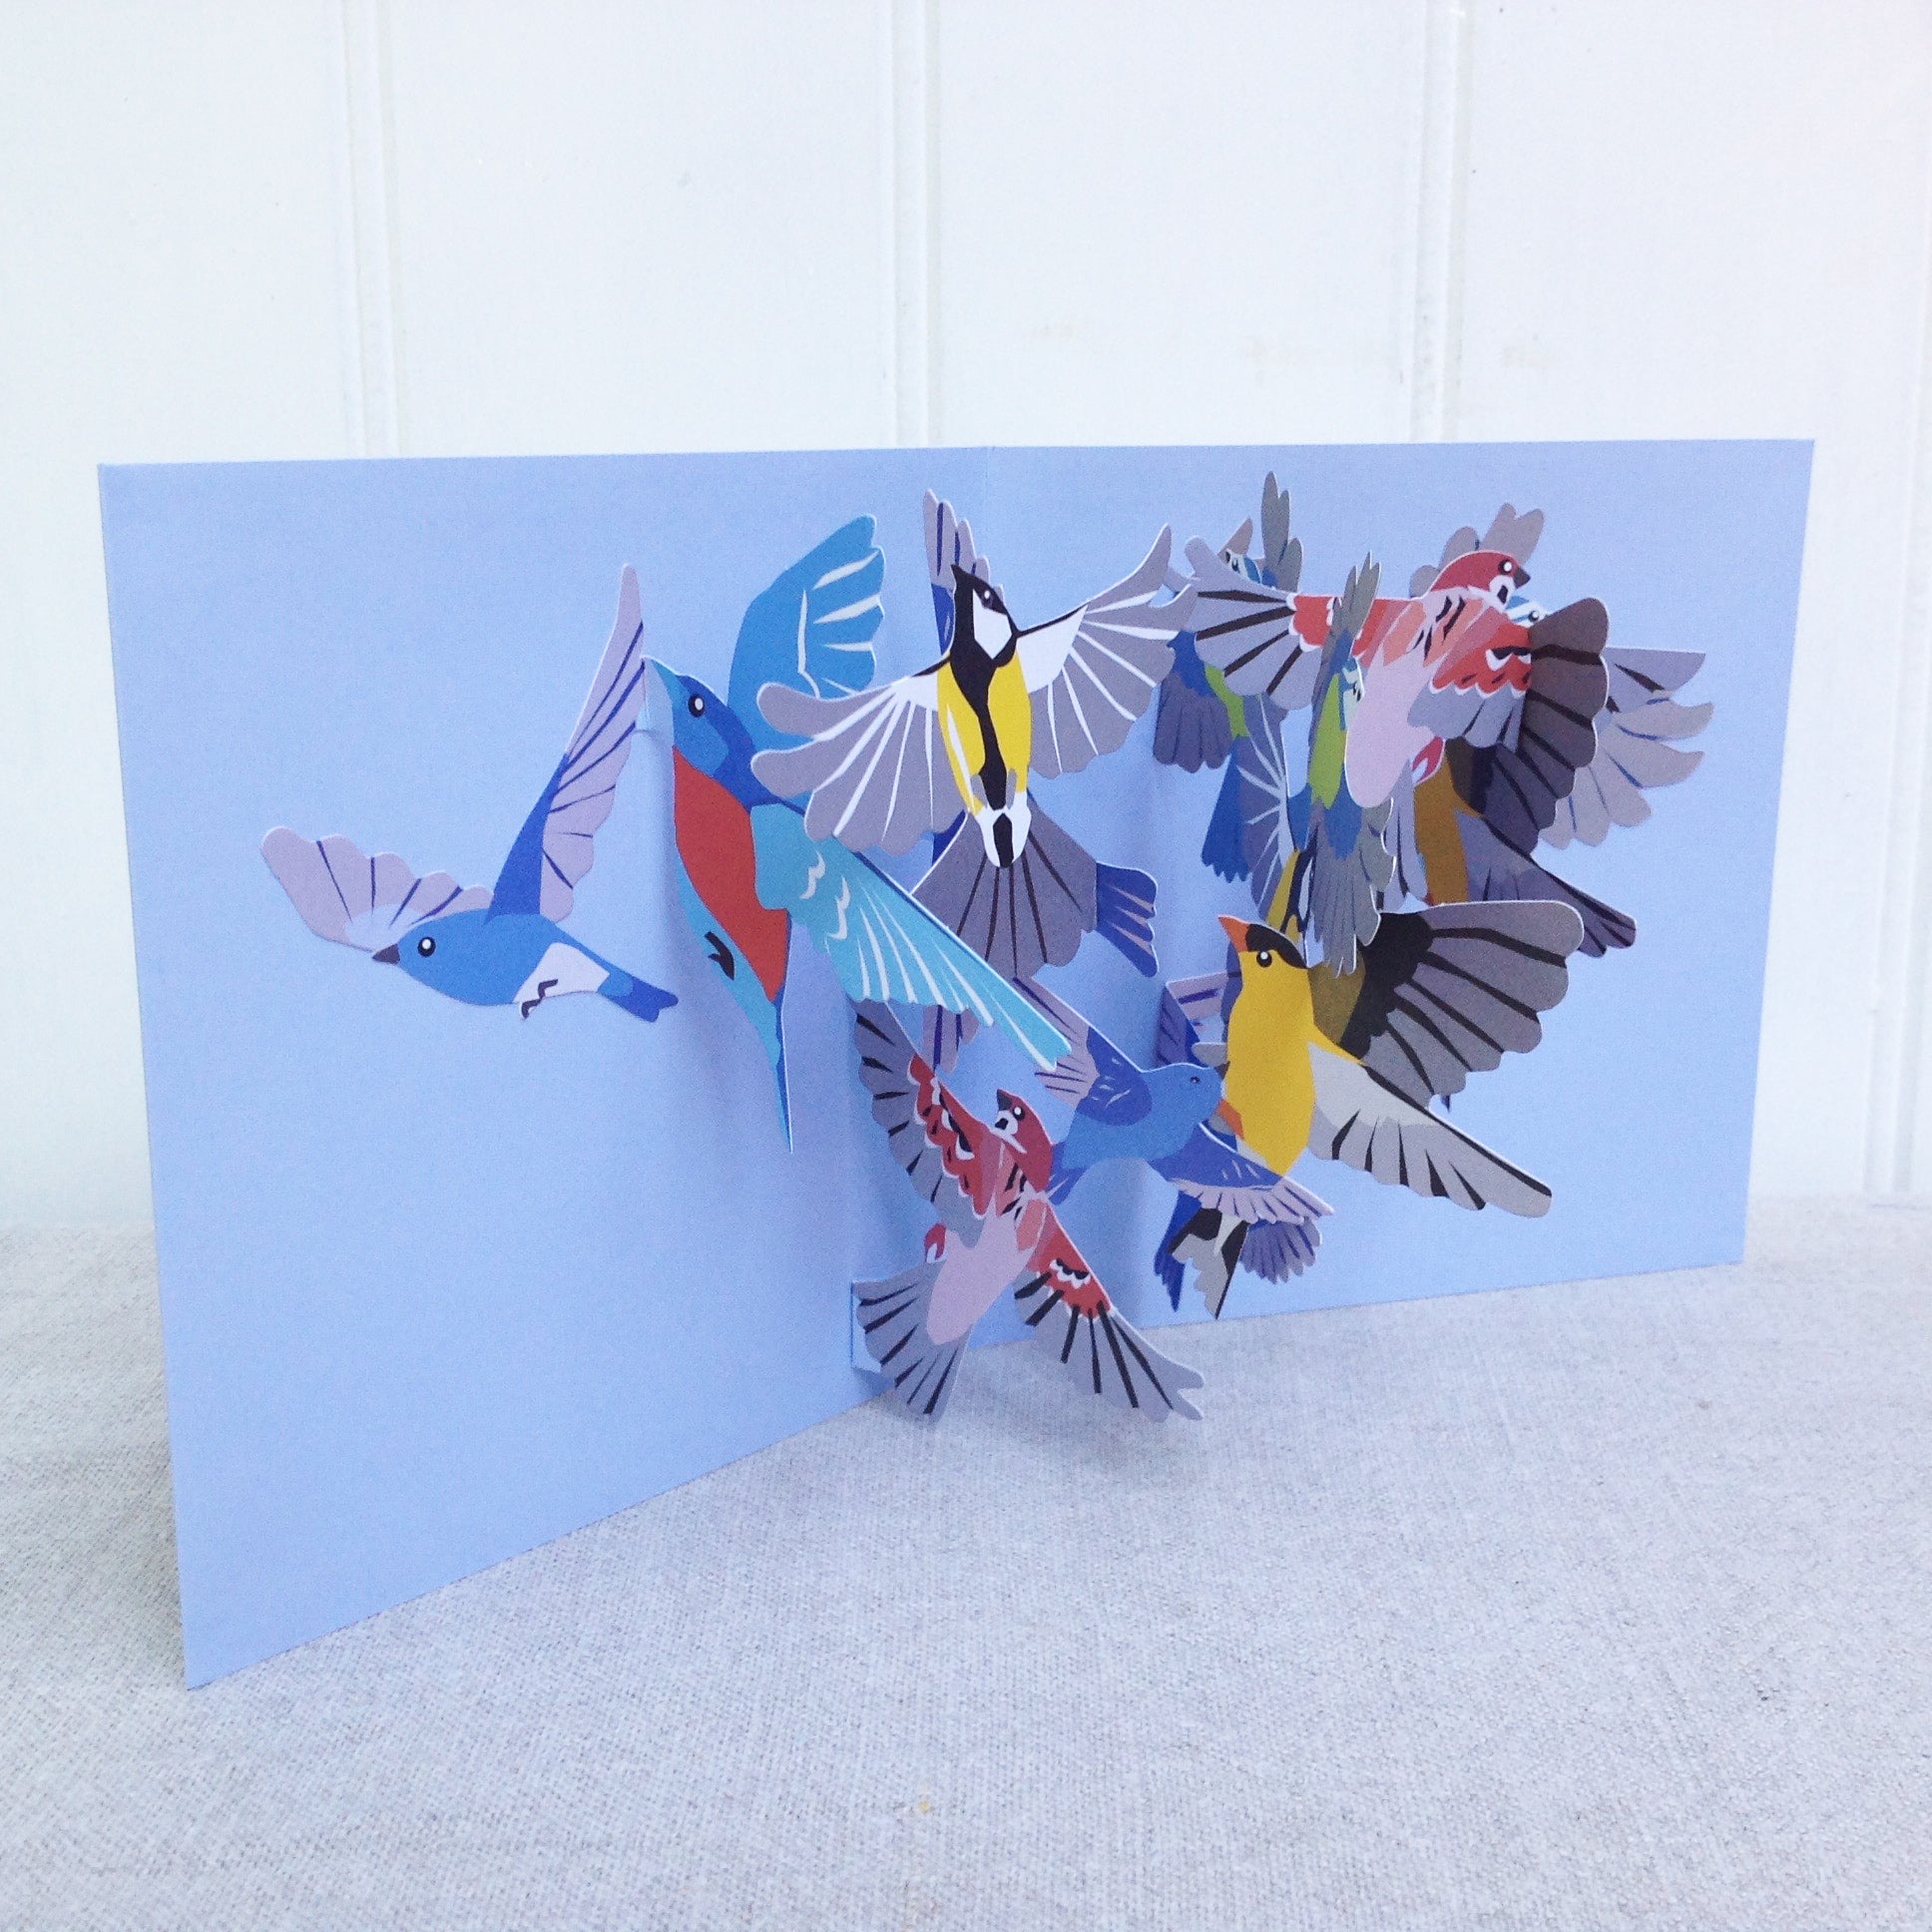 Pop out 3D Flock of Birds greetings card